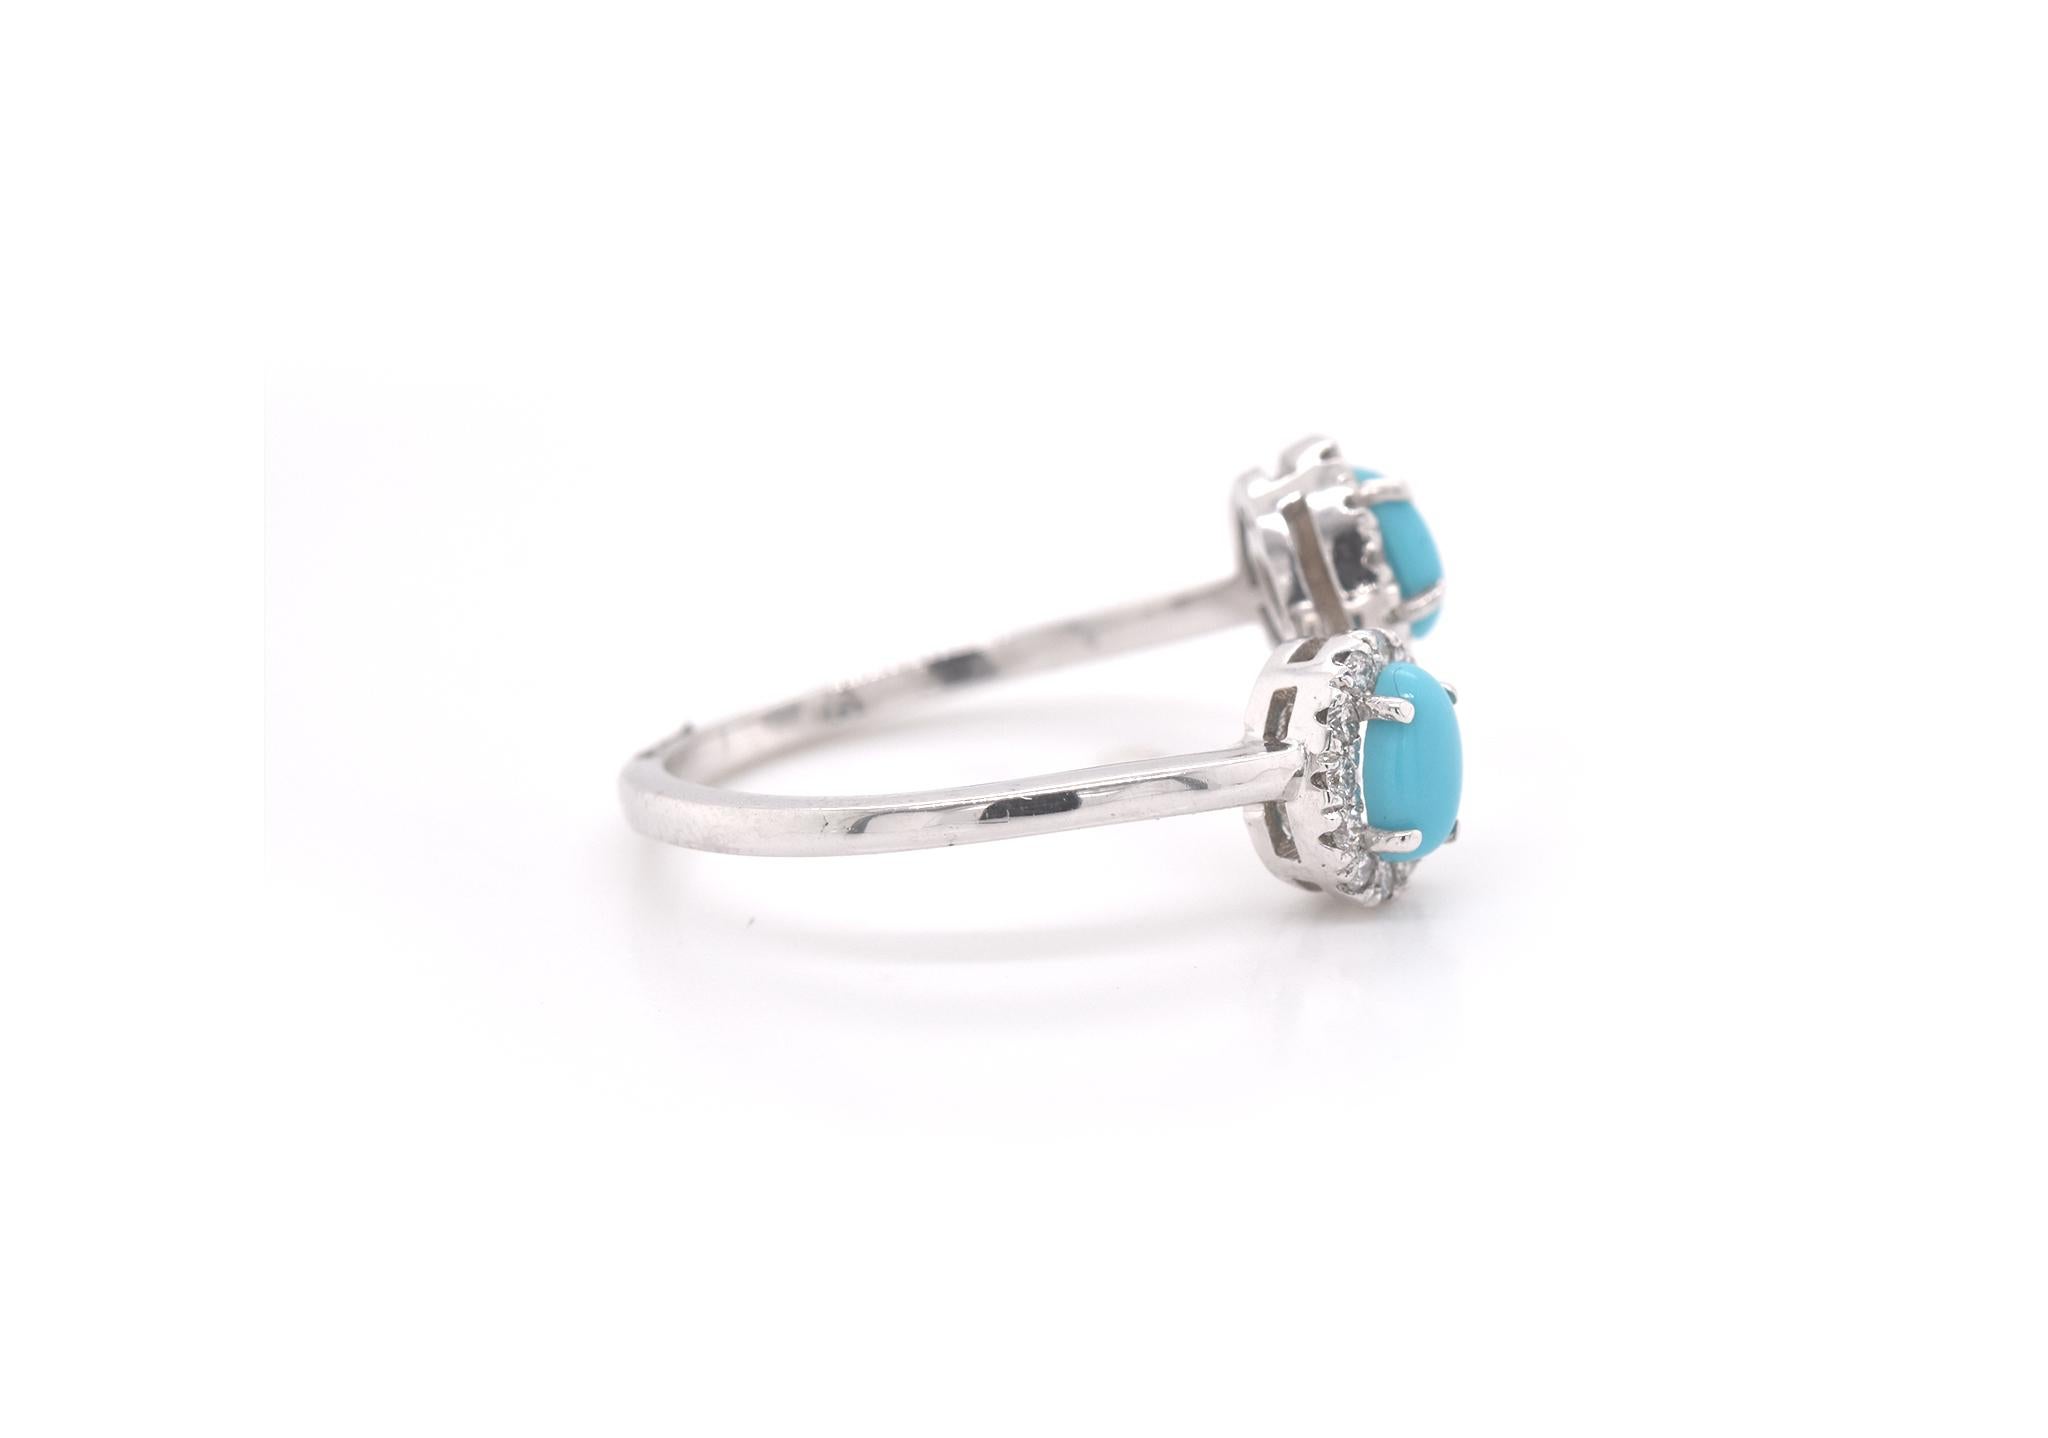 Designer: The Estate Watch and Jewelry Company
Material: 14k white gold
Turquoise: 2 oval cabochon cut turquoise 
Diamonds: 24 round brilliant cuts = 0.34cttw
Ring size: 6 ½ (please allow two additional shipping days for sizing requests)
Dimensions: